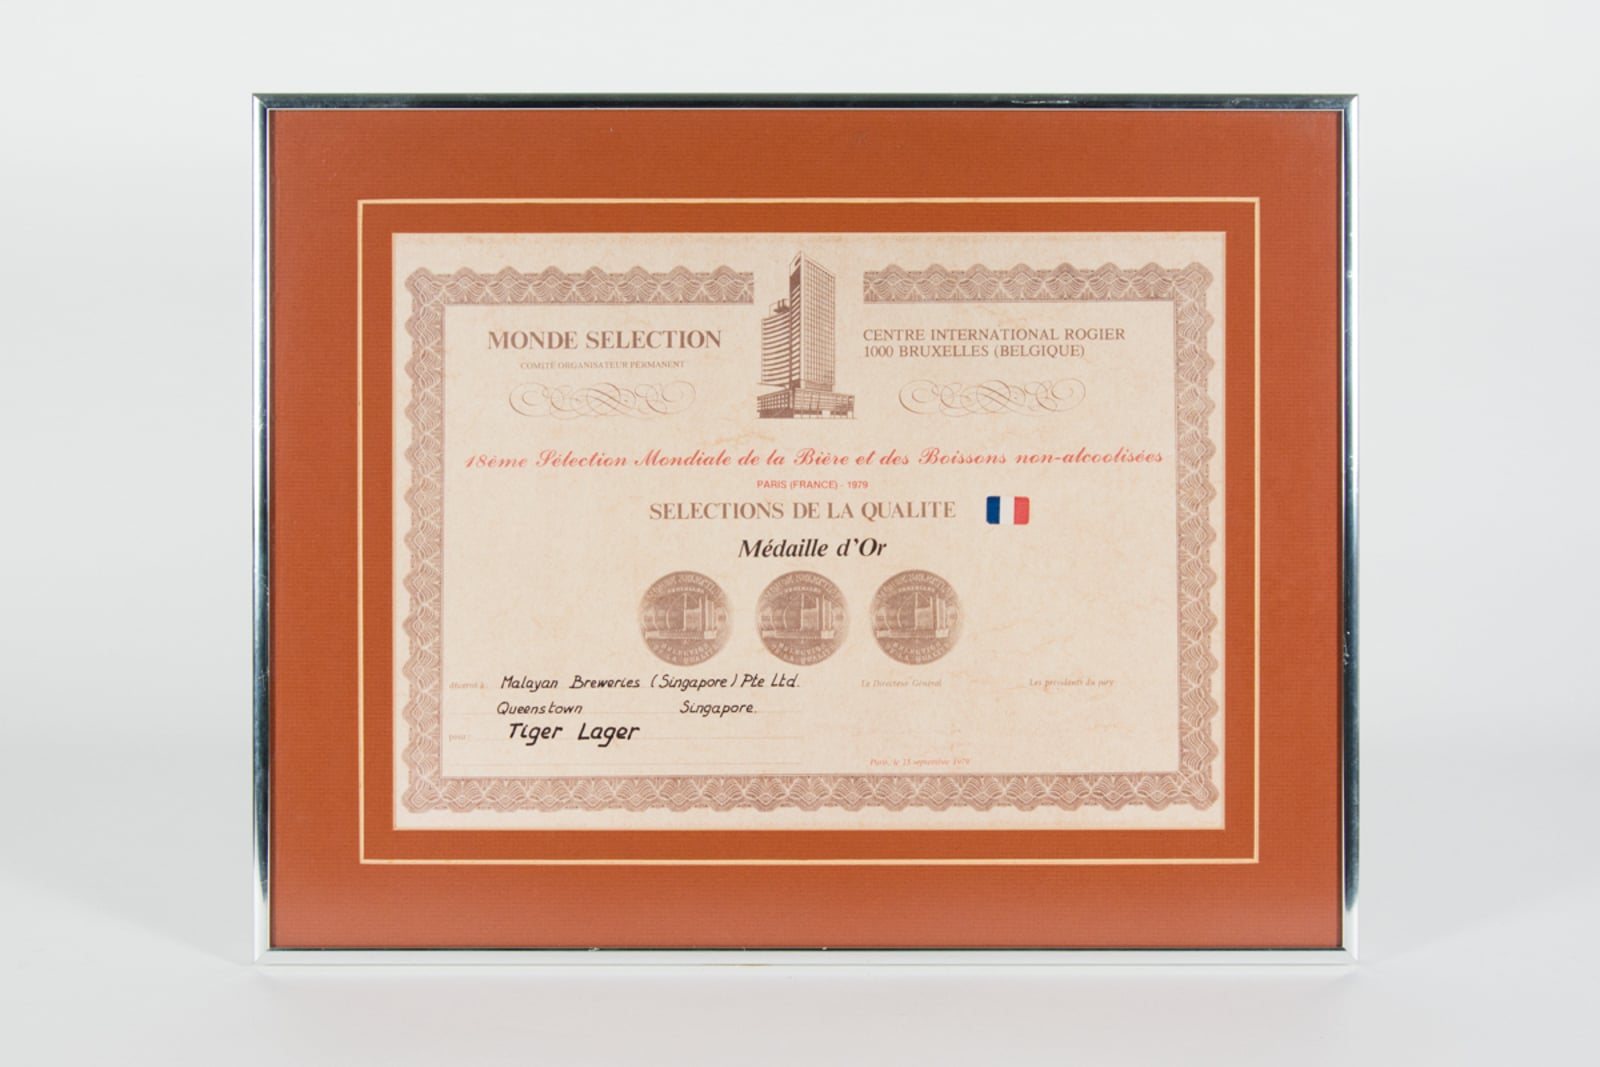 Tiger Lager Médaille d'Or, Monde Selection Certificate 1979